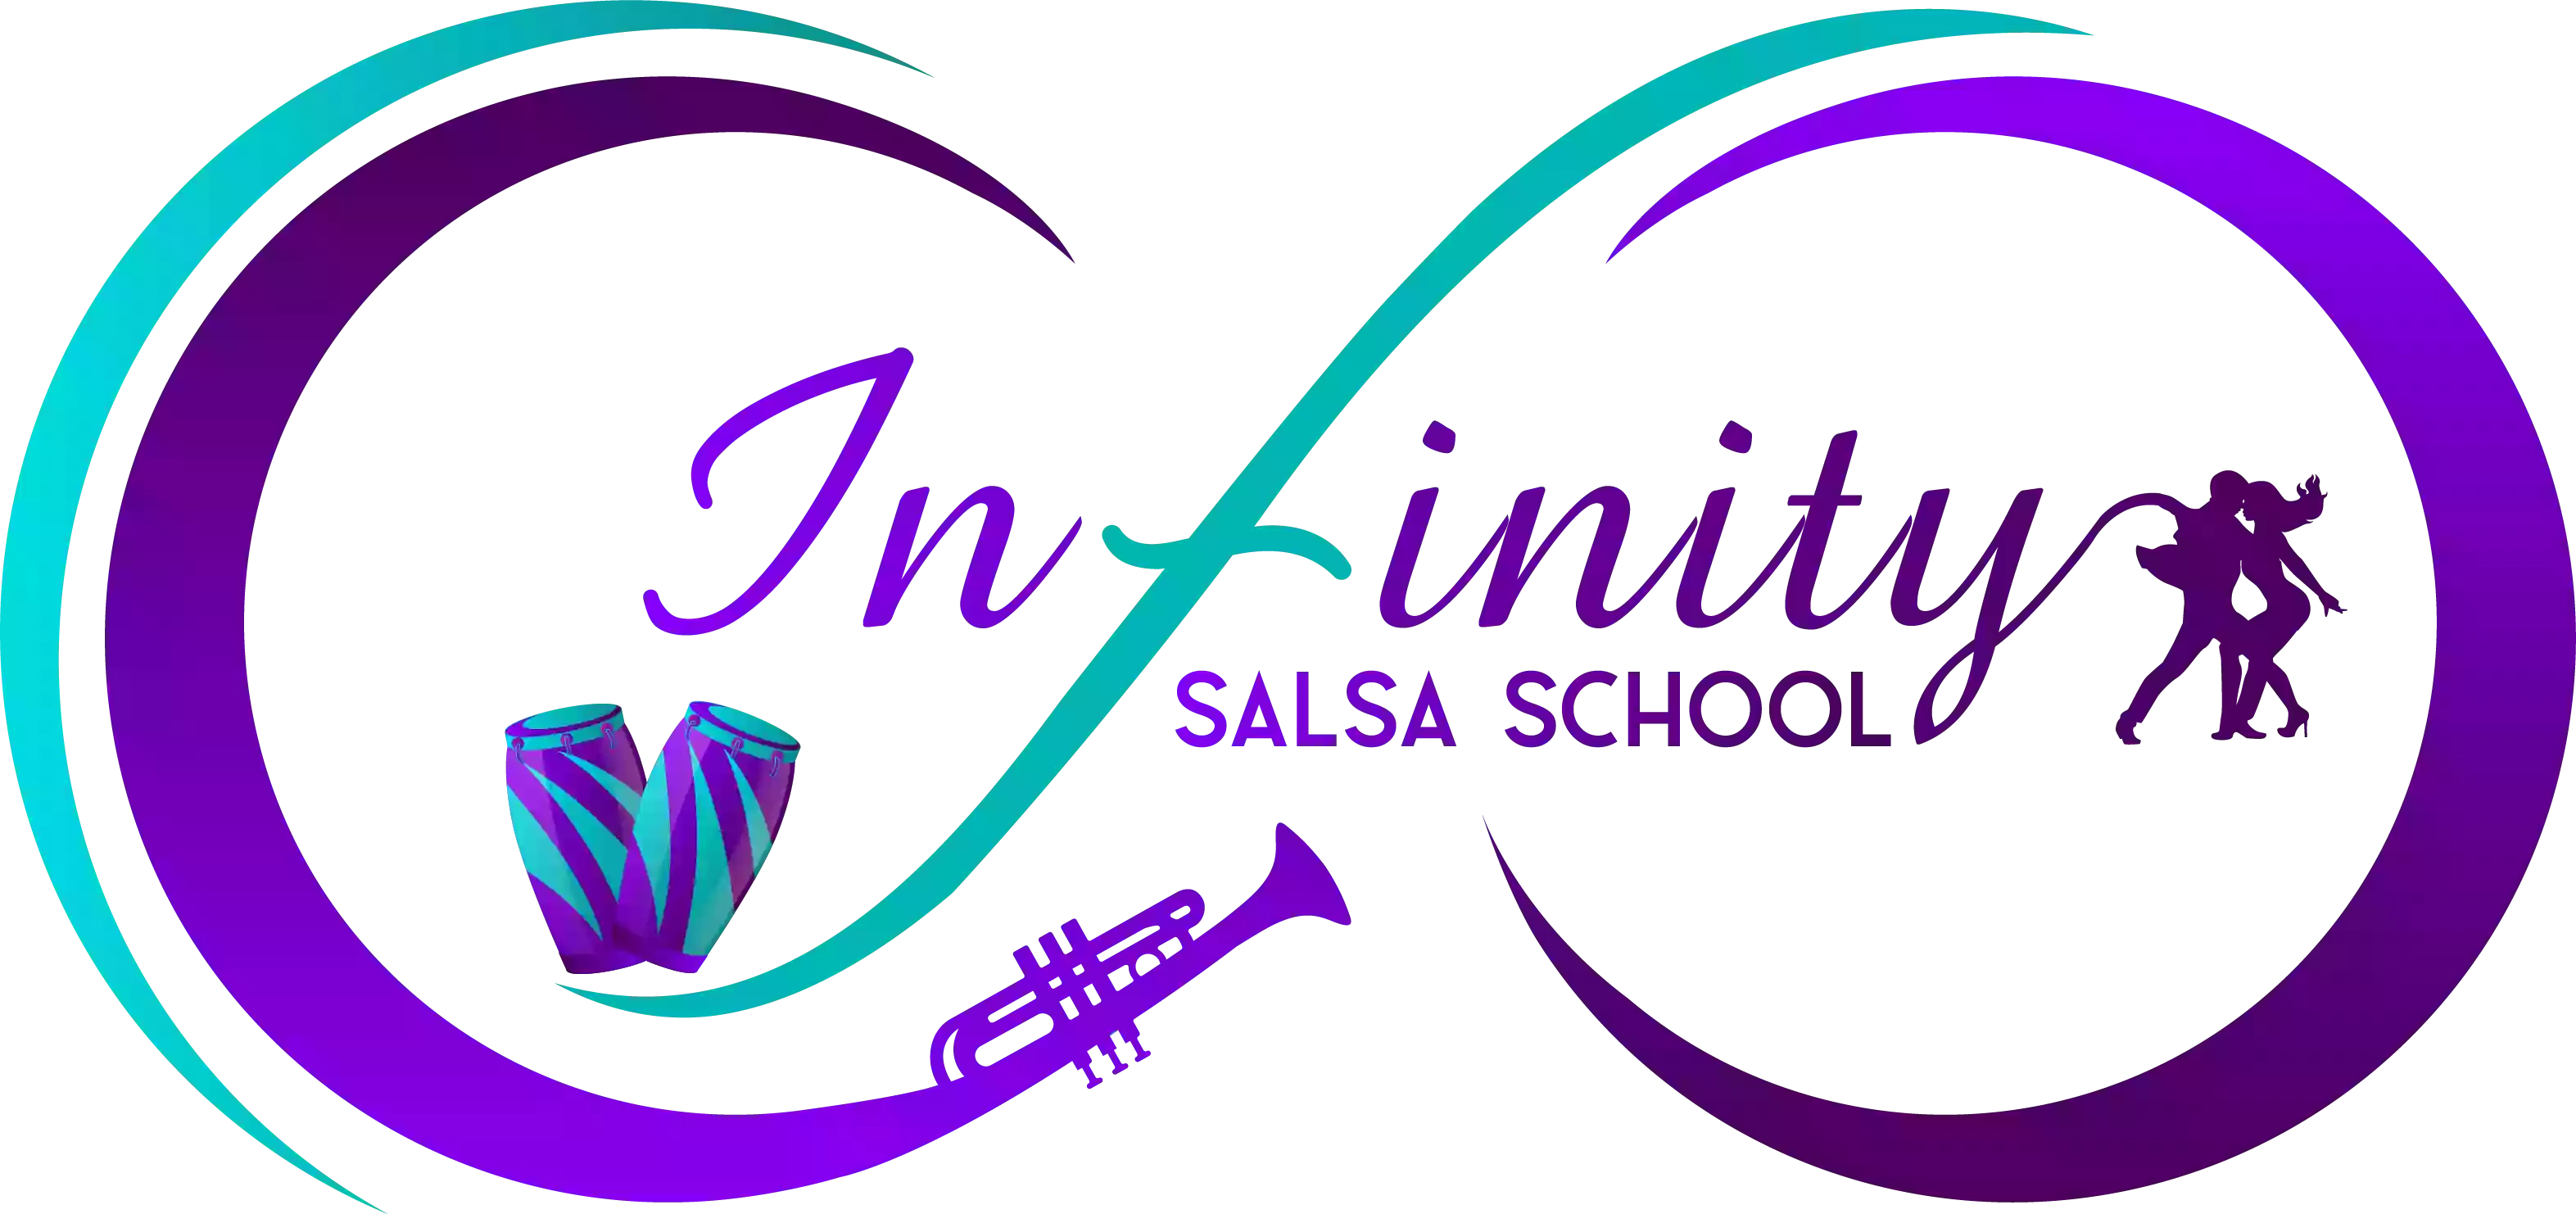 Infinity Salsa School - Salsa classes for beginners. Salsa Line Style, Bachata for beginners. Book now.